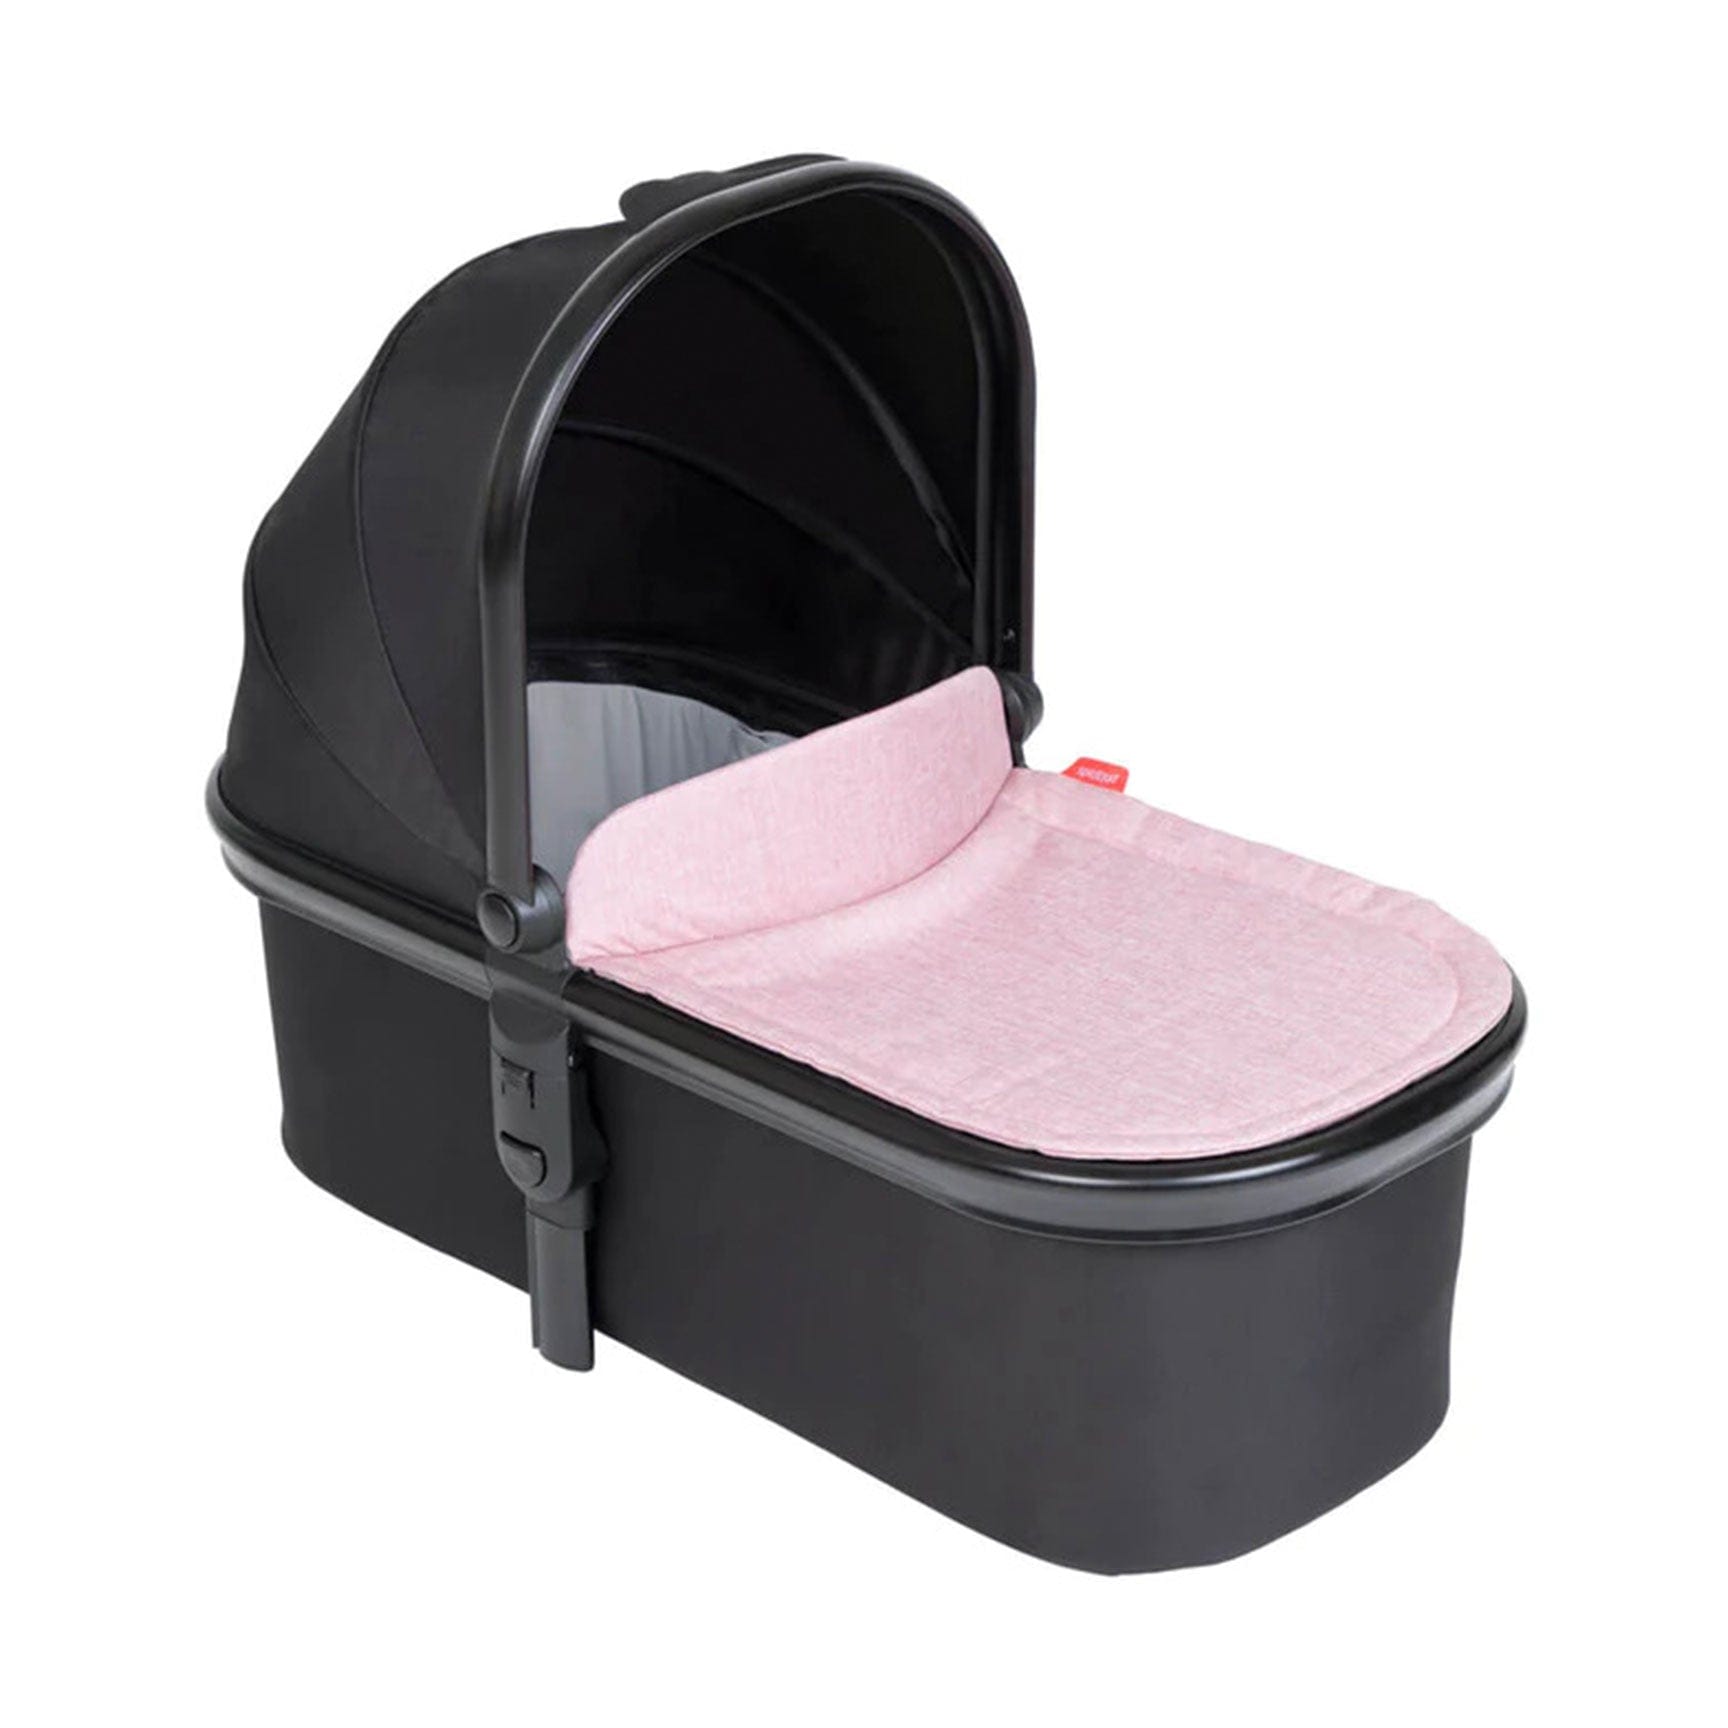 Phil & Teds Snug Carrycot With Lid in Blush Chassis & Carrycots 12354-BLU 9420015767094